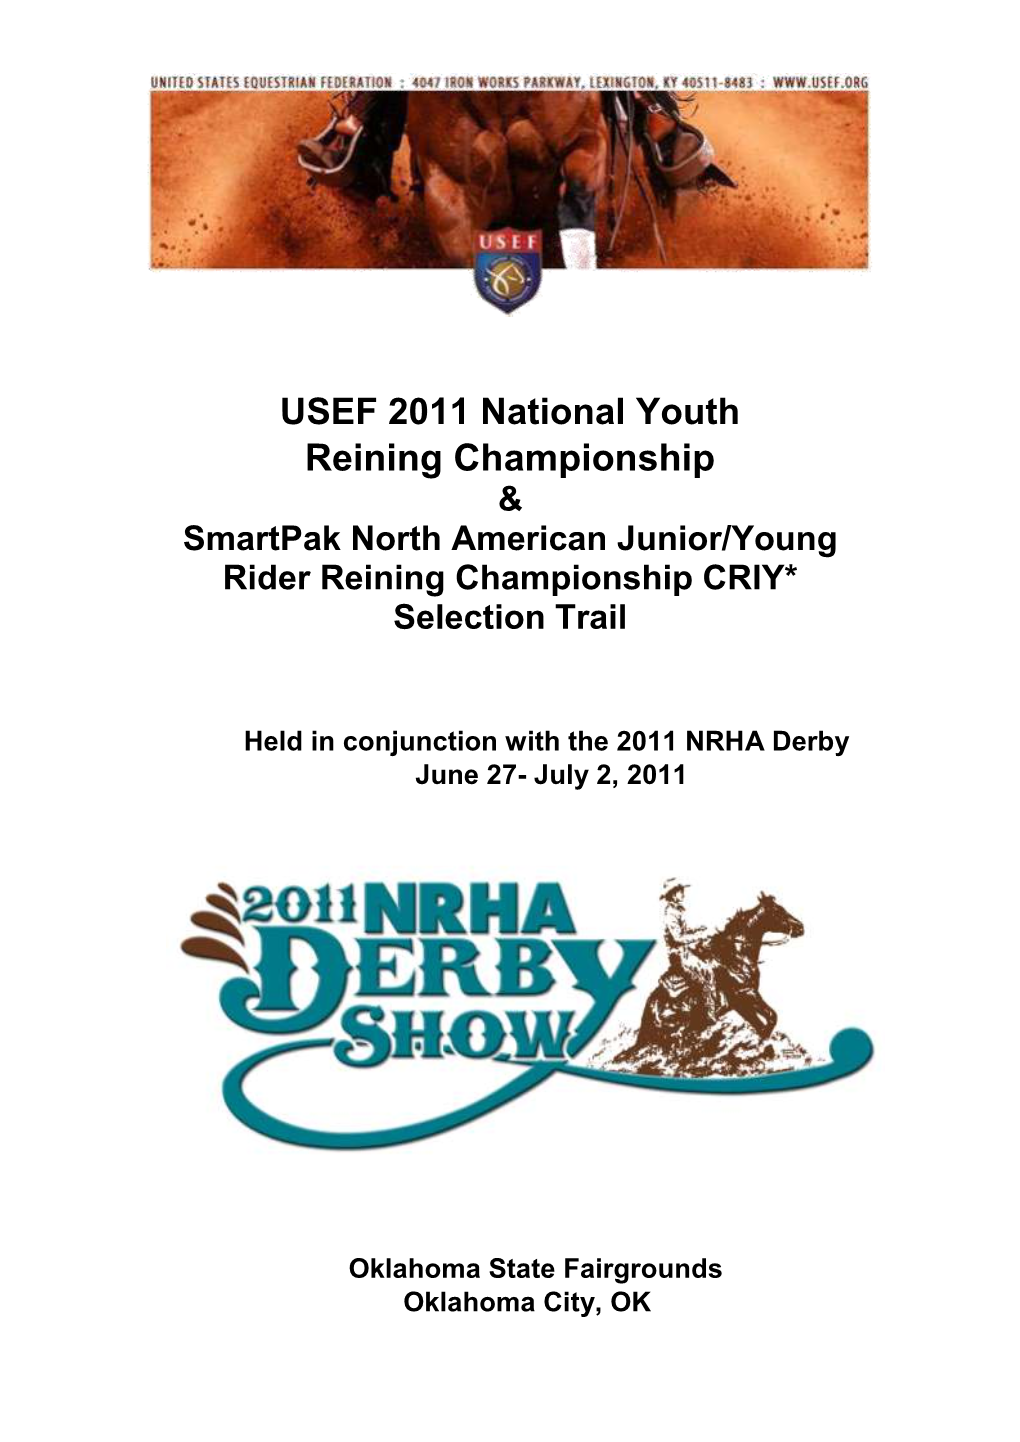 USEF 2011 National Youth Reining Championship & Smartpak North American Junior/Young Rider Reining Championship CRIY* Selection Trail